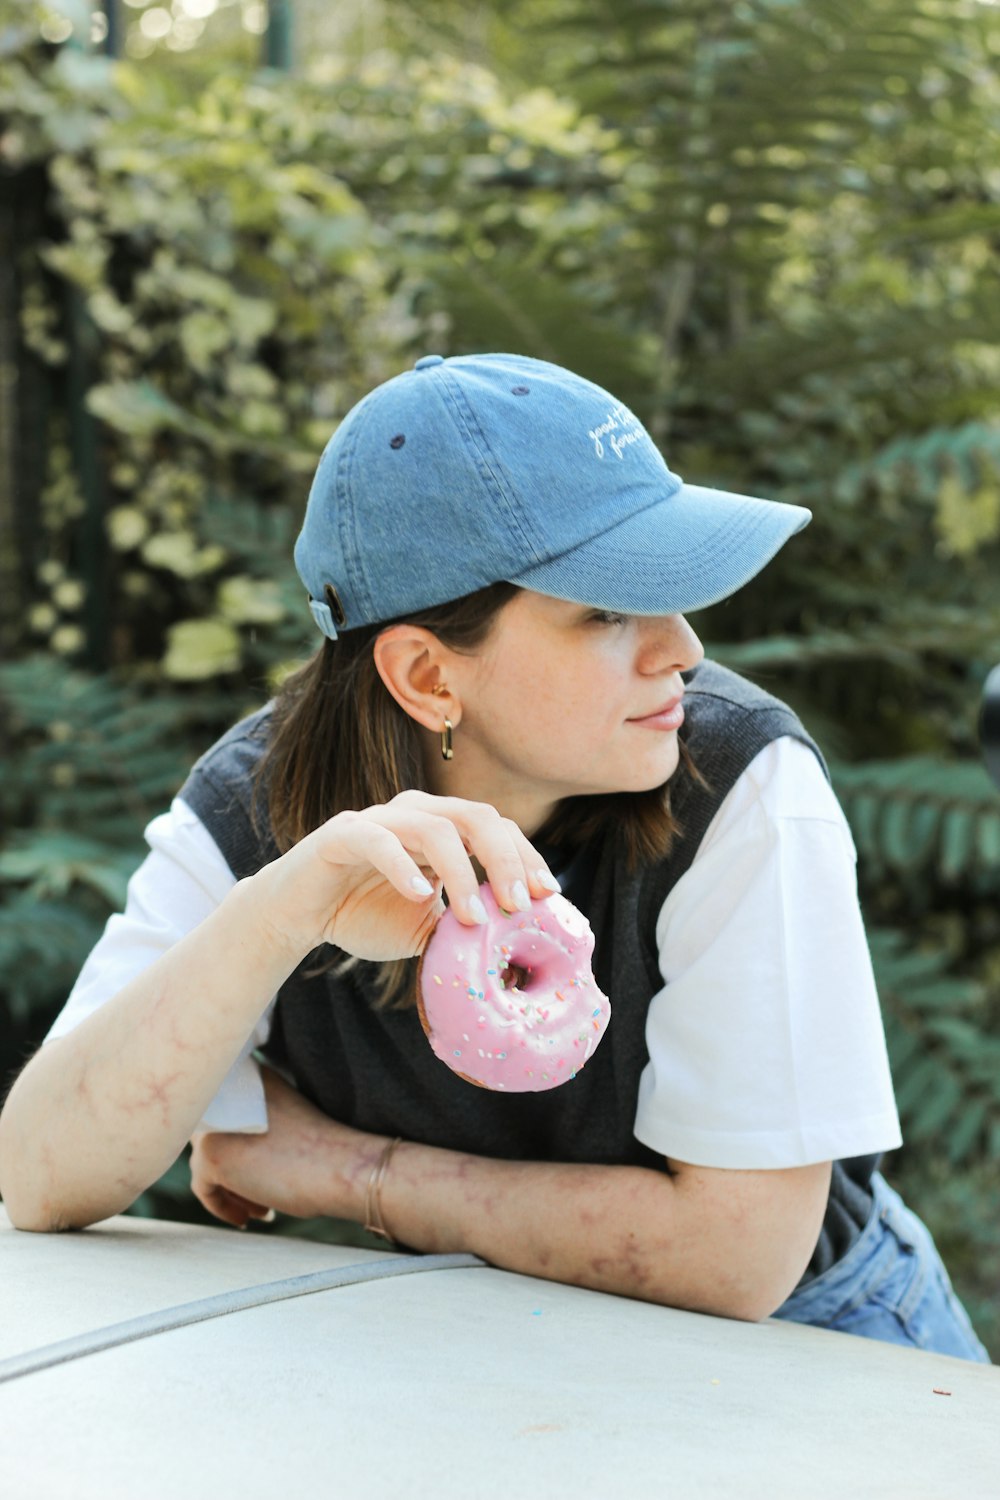 a woman sitting at a table with a doughnut in her hand